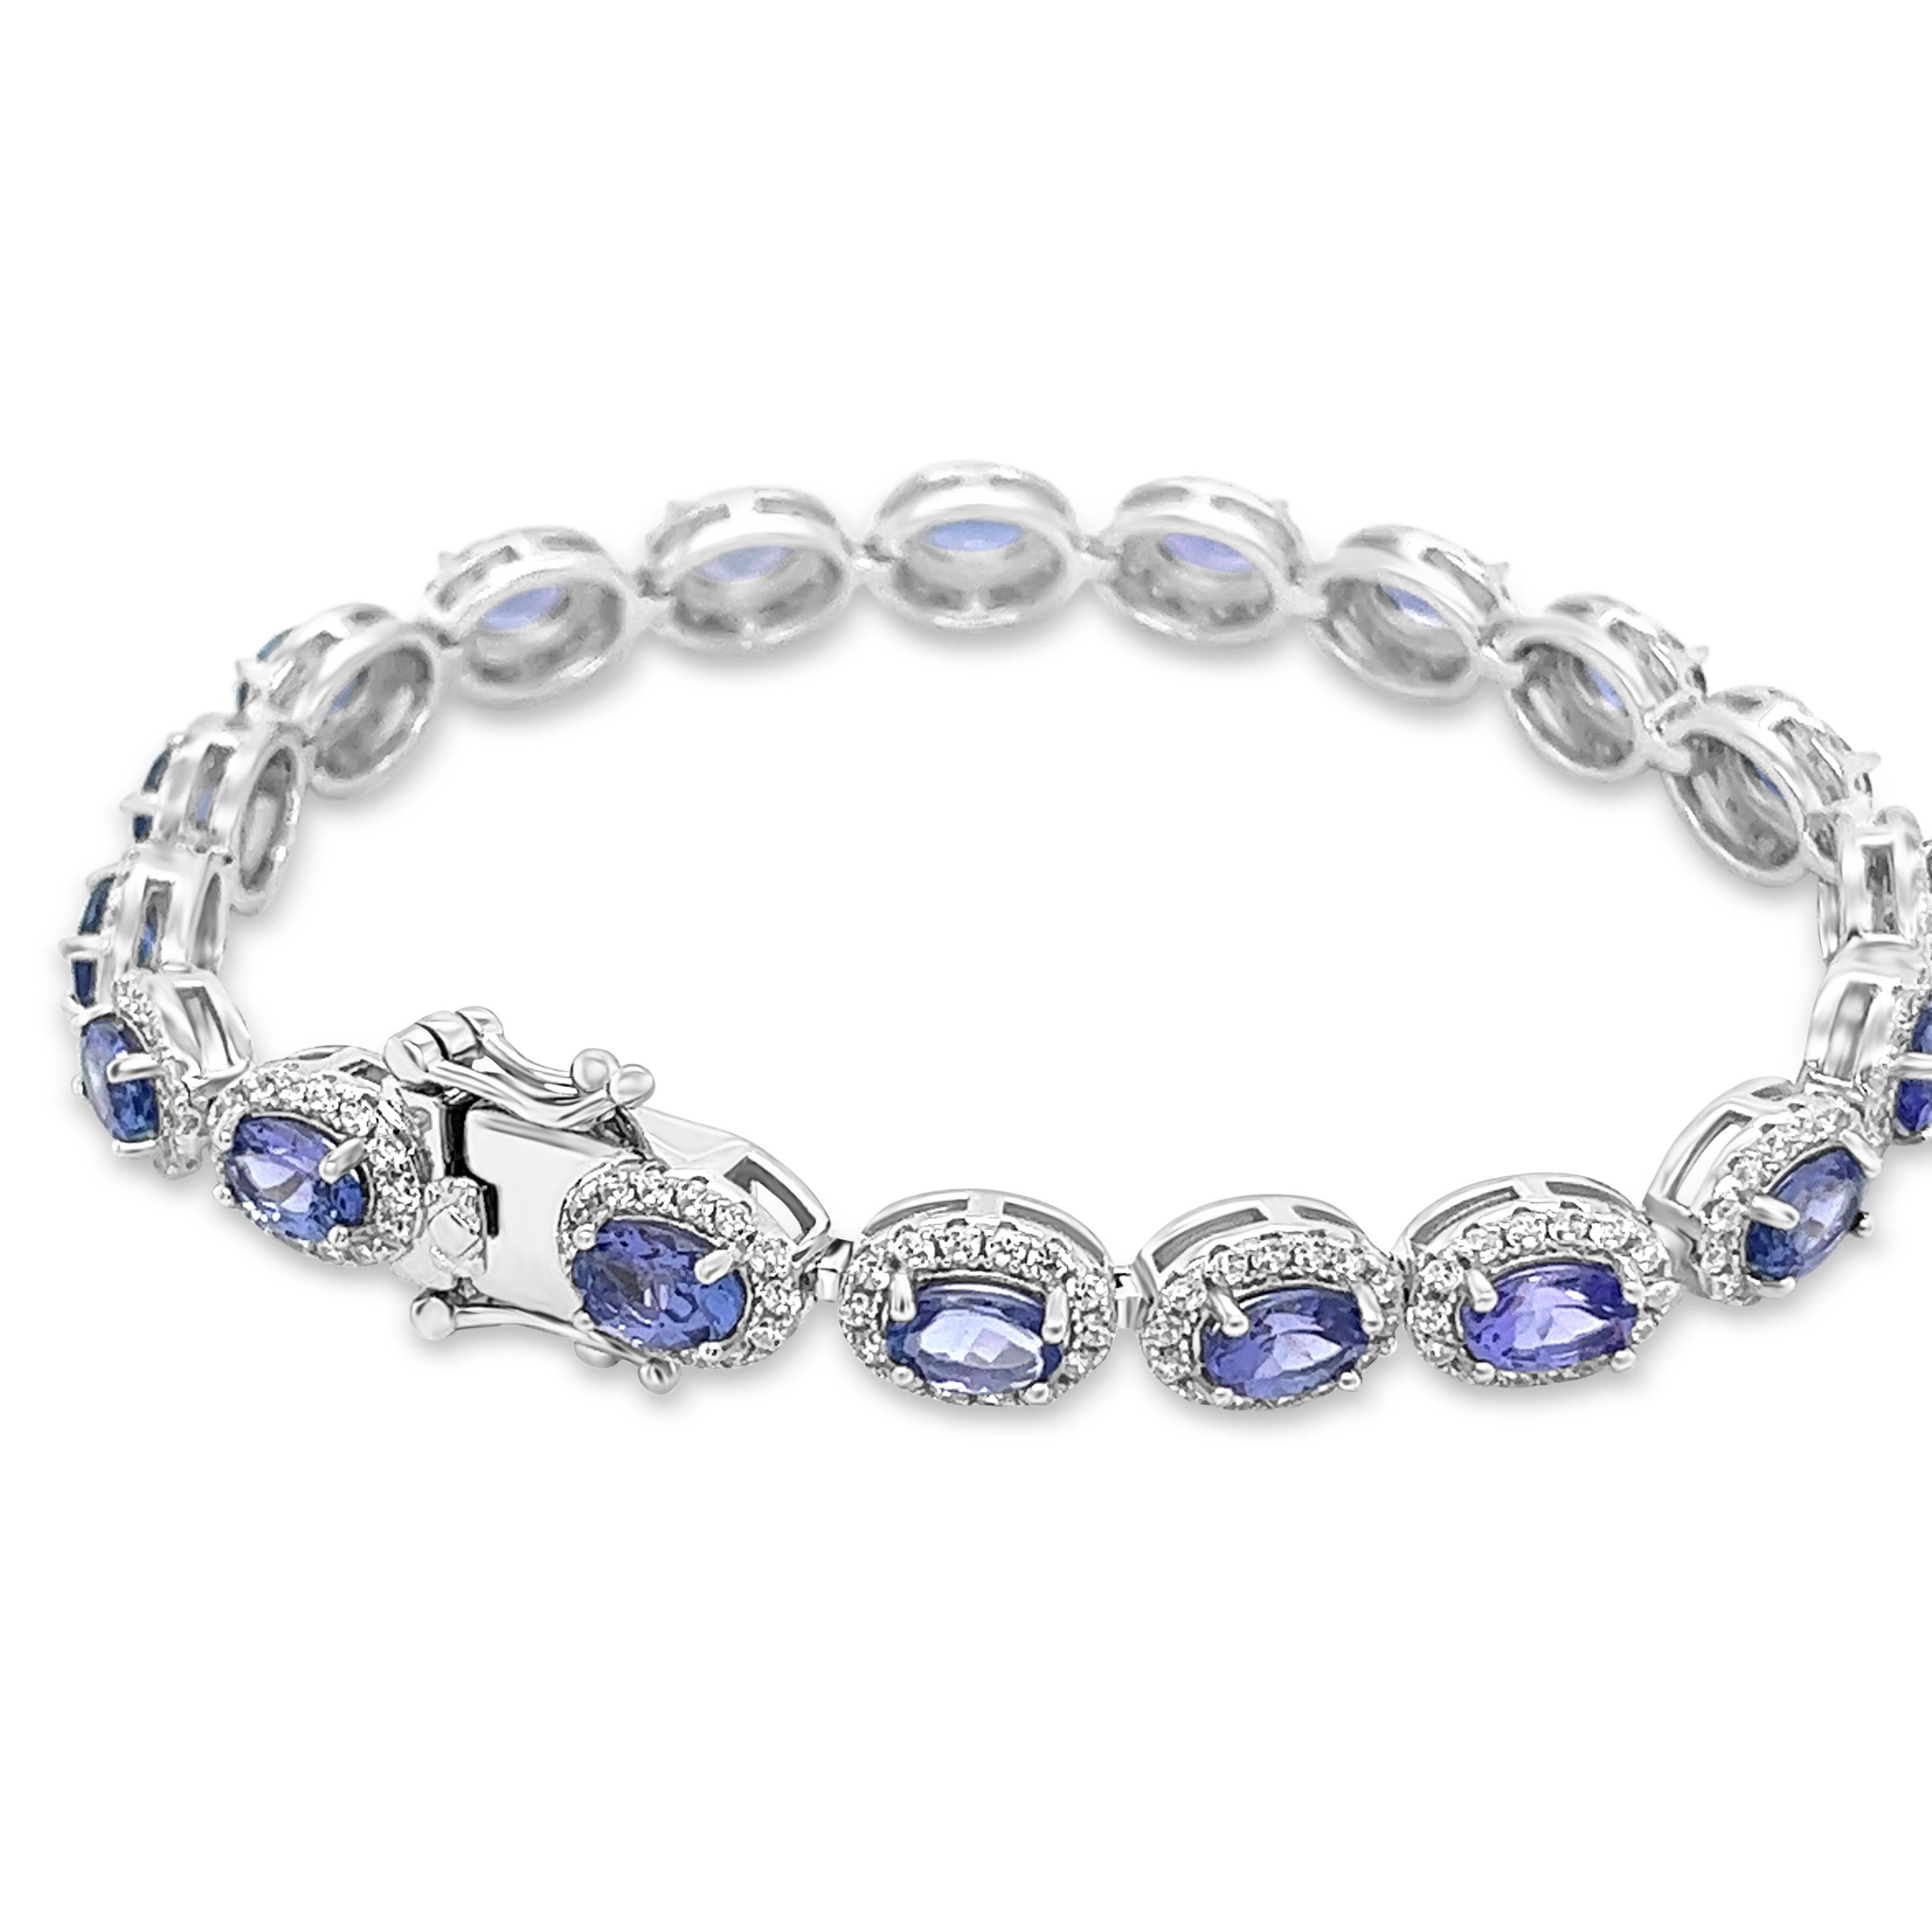 19.23 Carats Tanzanite Tennis Bracelet Oval Cut Sterling Silver Bridal Jewelry  In New Condition For Sale In New York, NY